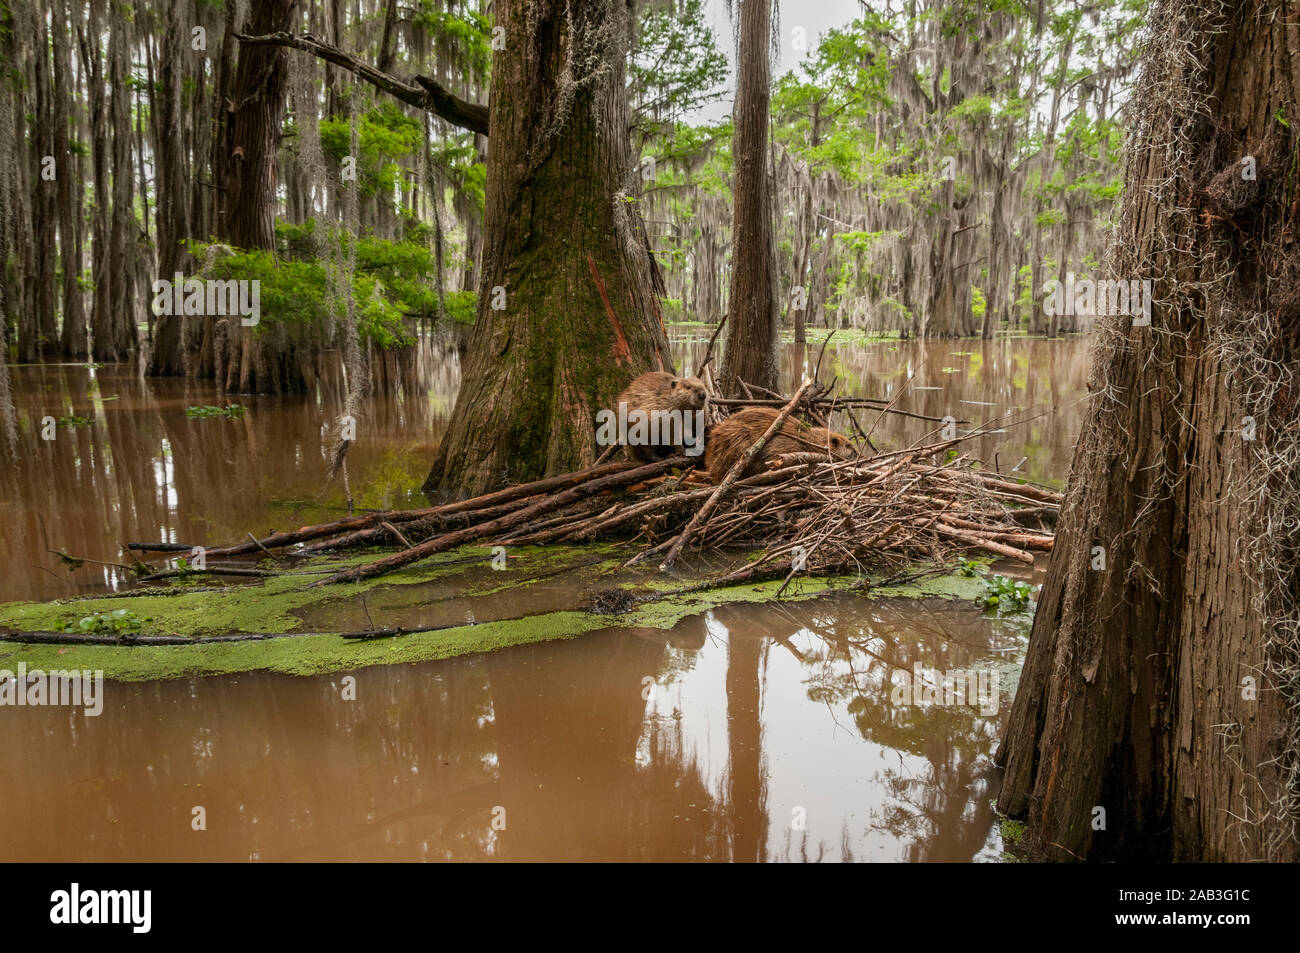 A North American Beaver (Castor canadensis) family on their lodge in Caddo Lake, near the town of Uncertain, Texas, USA. Stock Photo